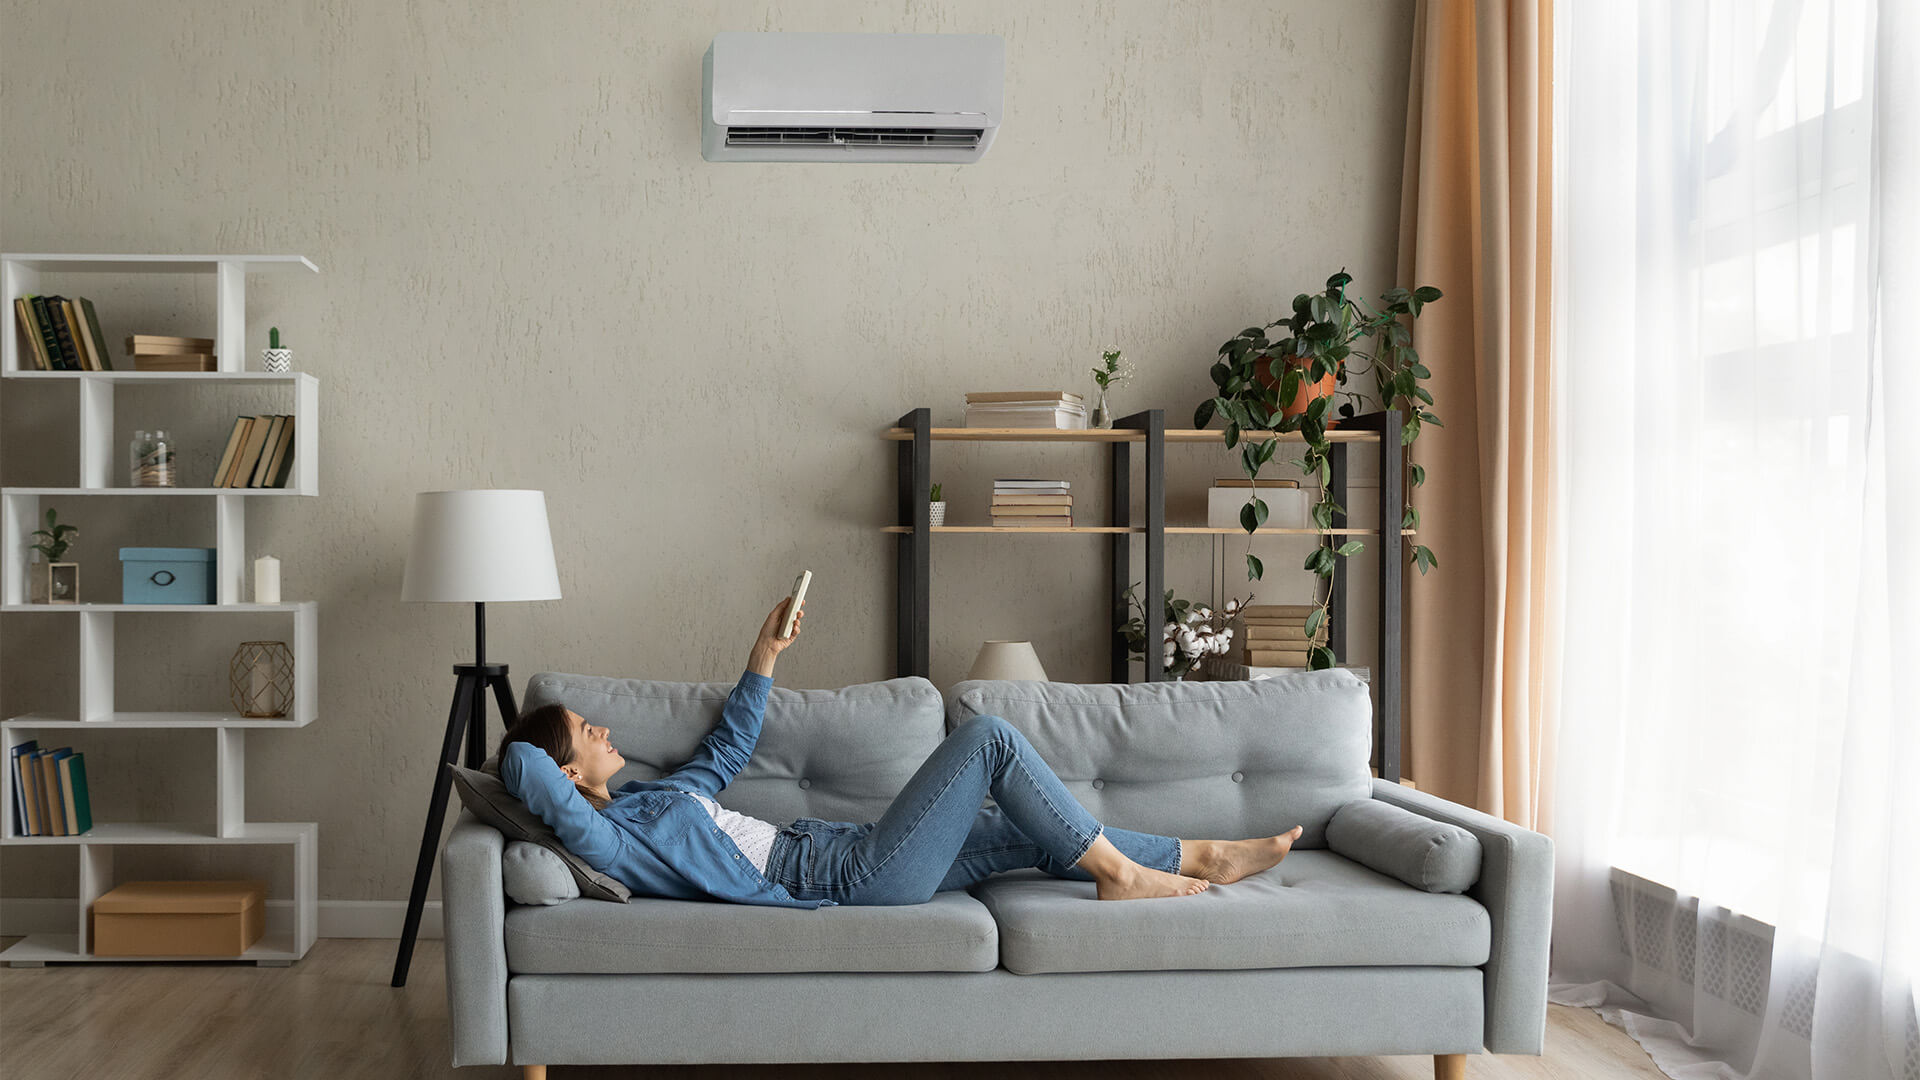 Woman at home on her sofa using a remote to control the HVAC system